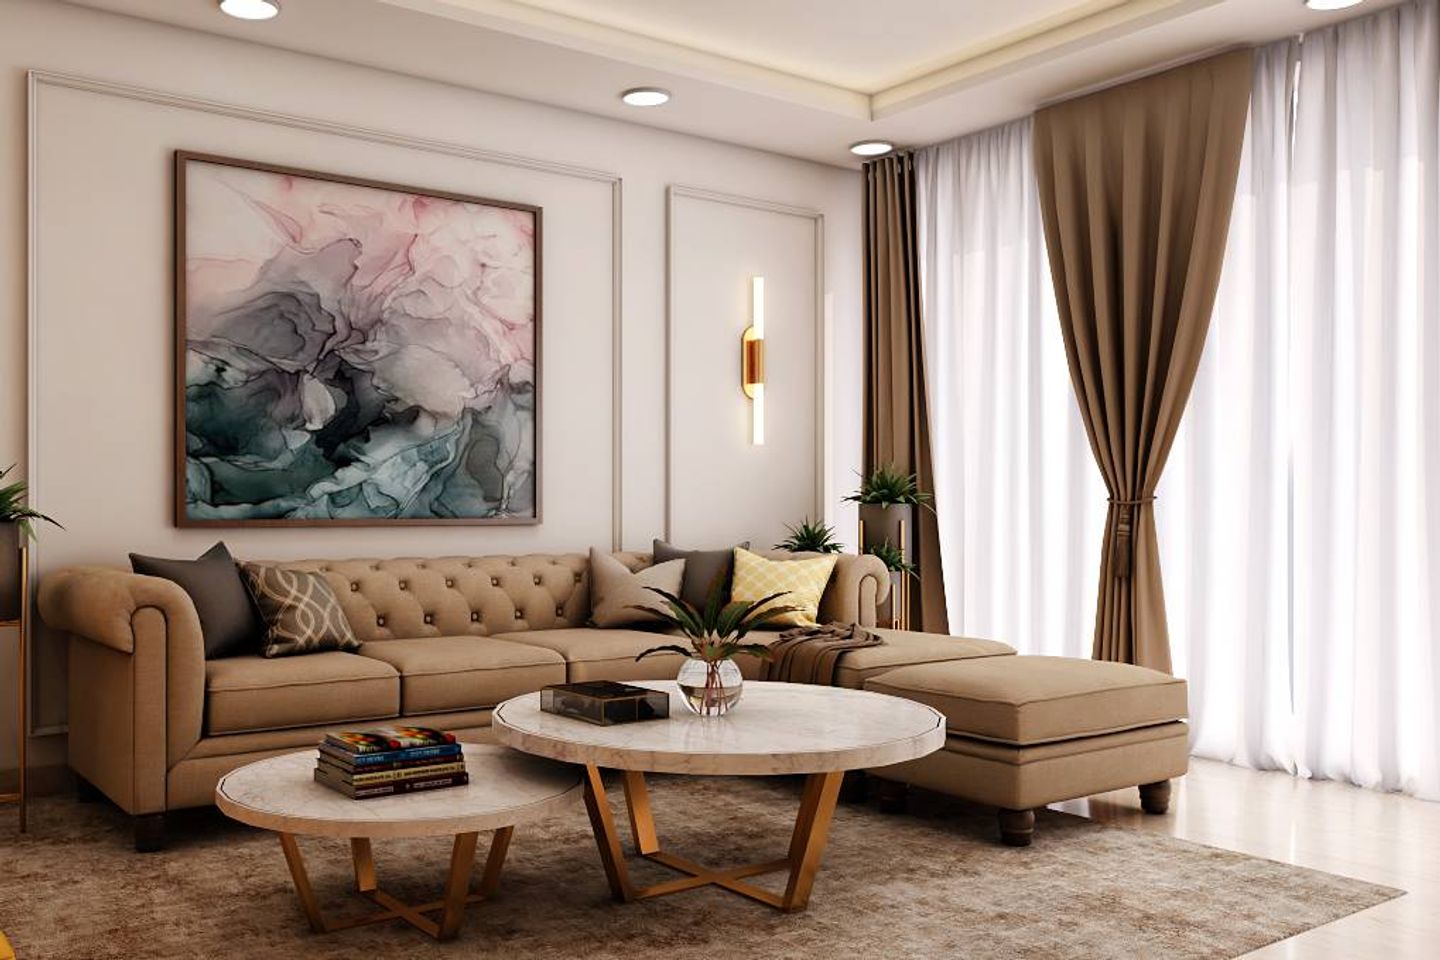 Modern Living Room Design With An L-Shaped Sofa With Cream Upholstery